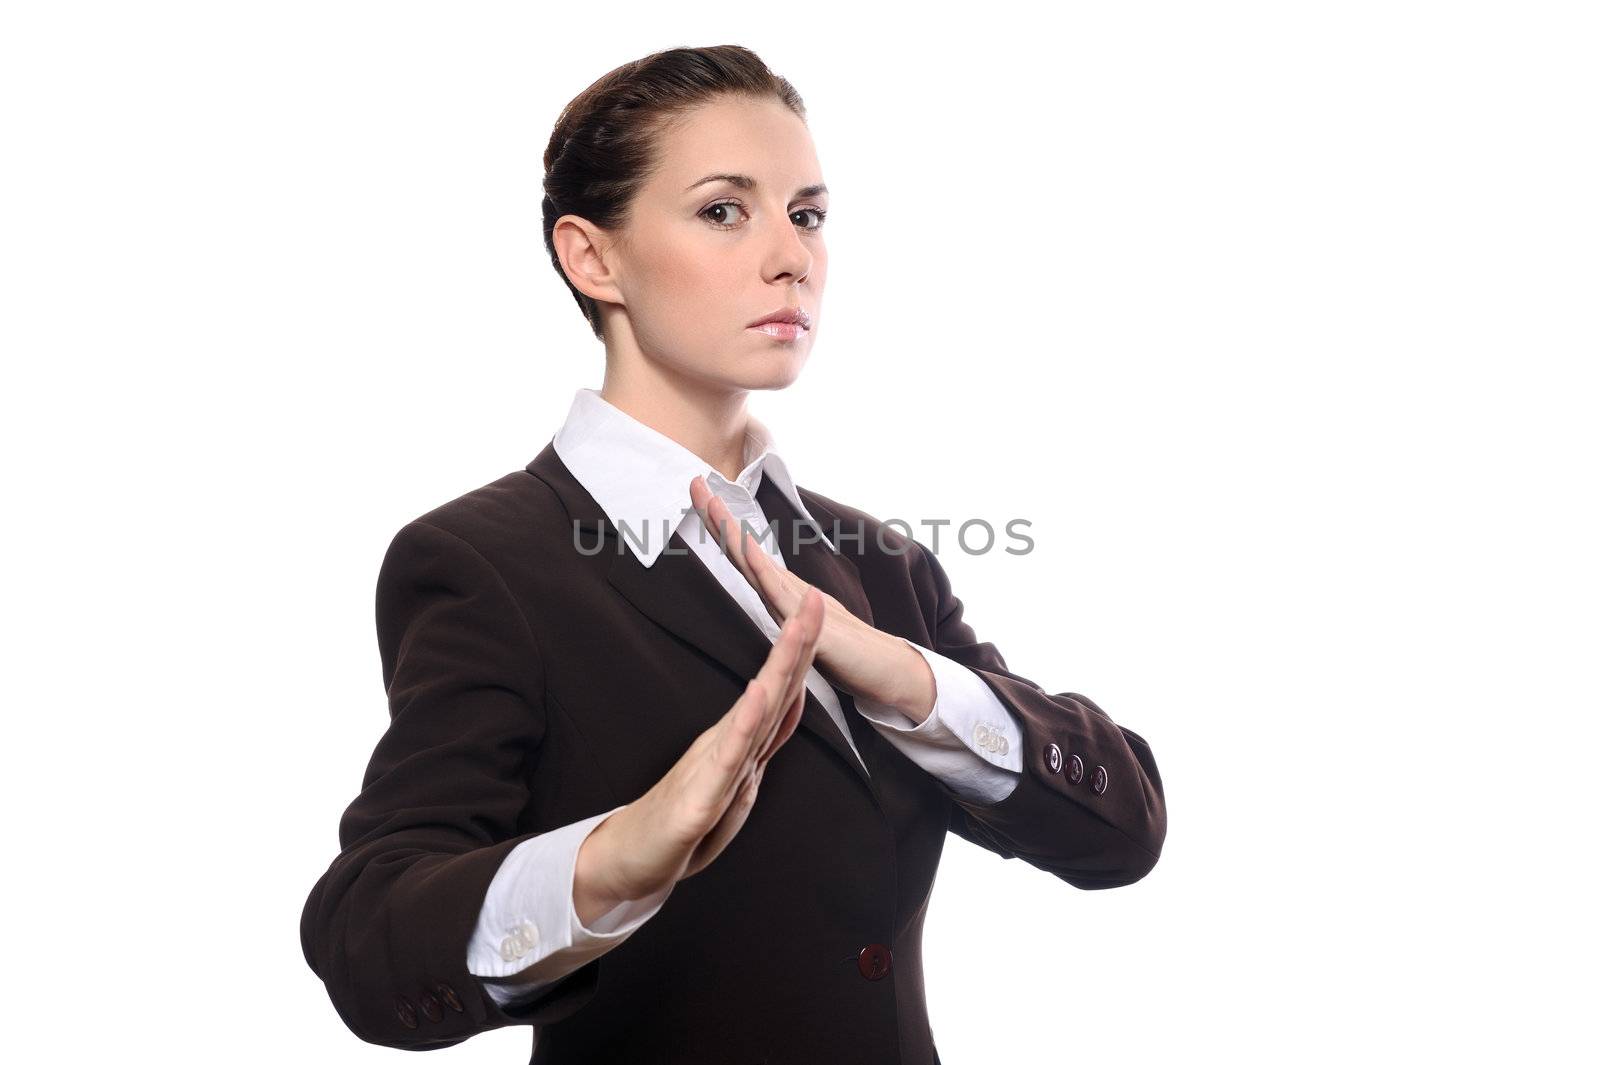 Karate business woman in defence pose isolating on white background